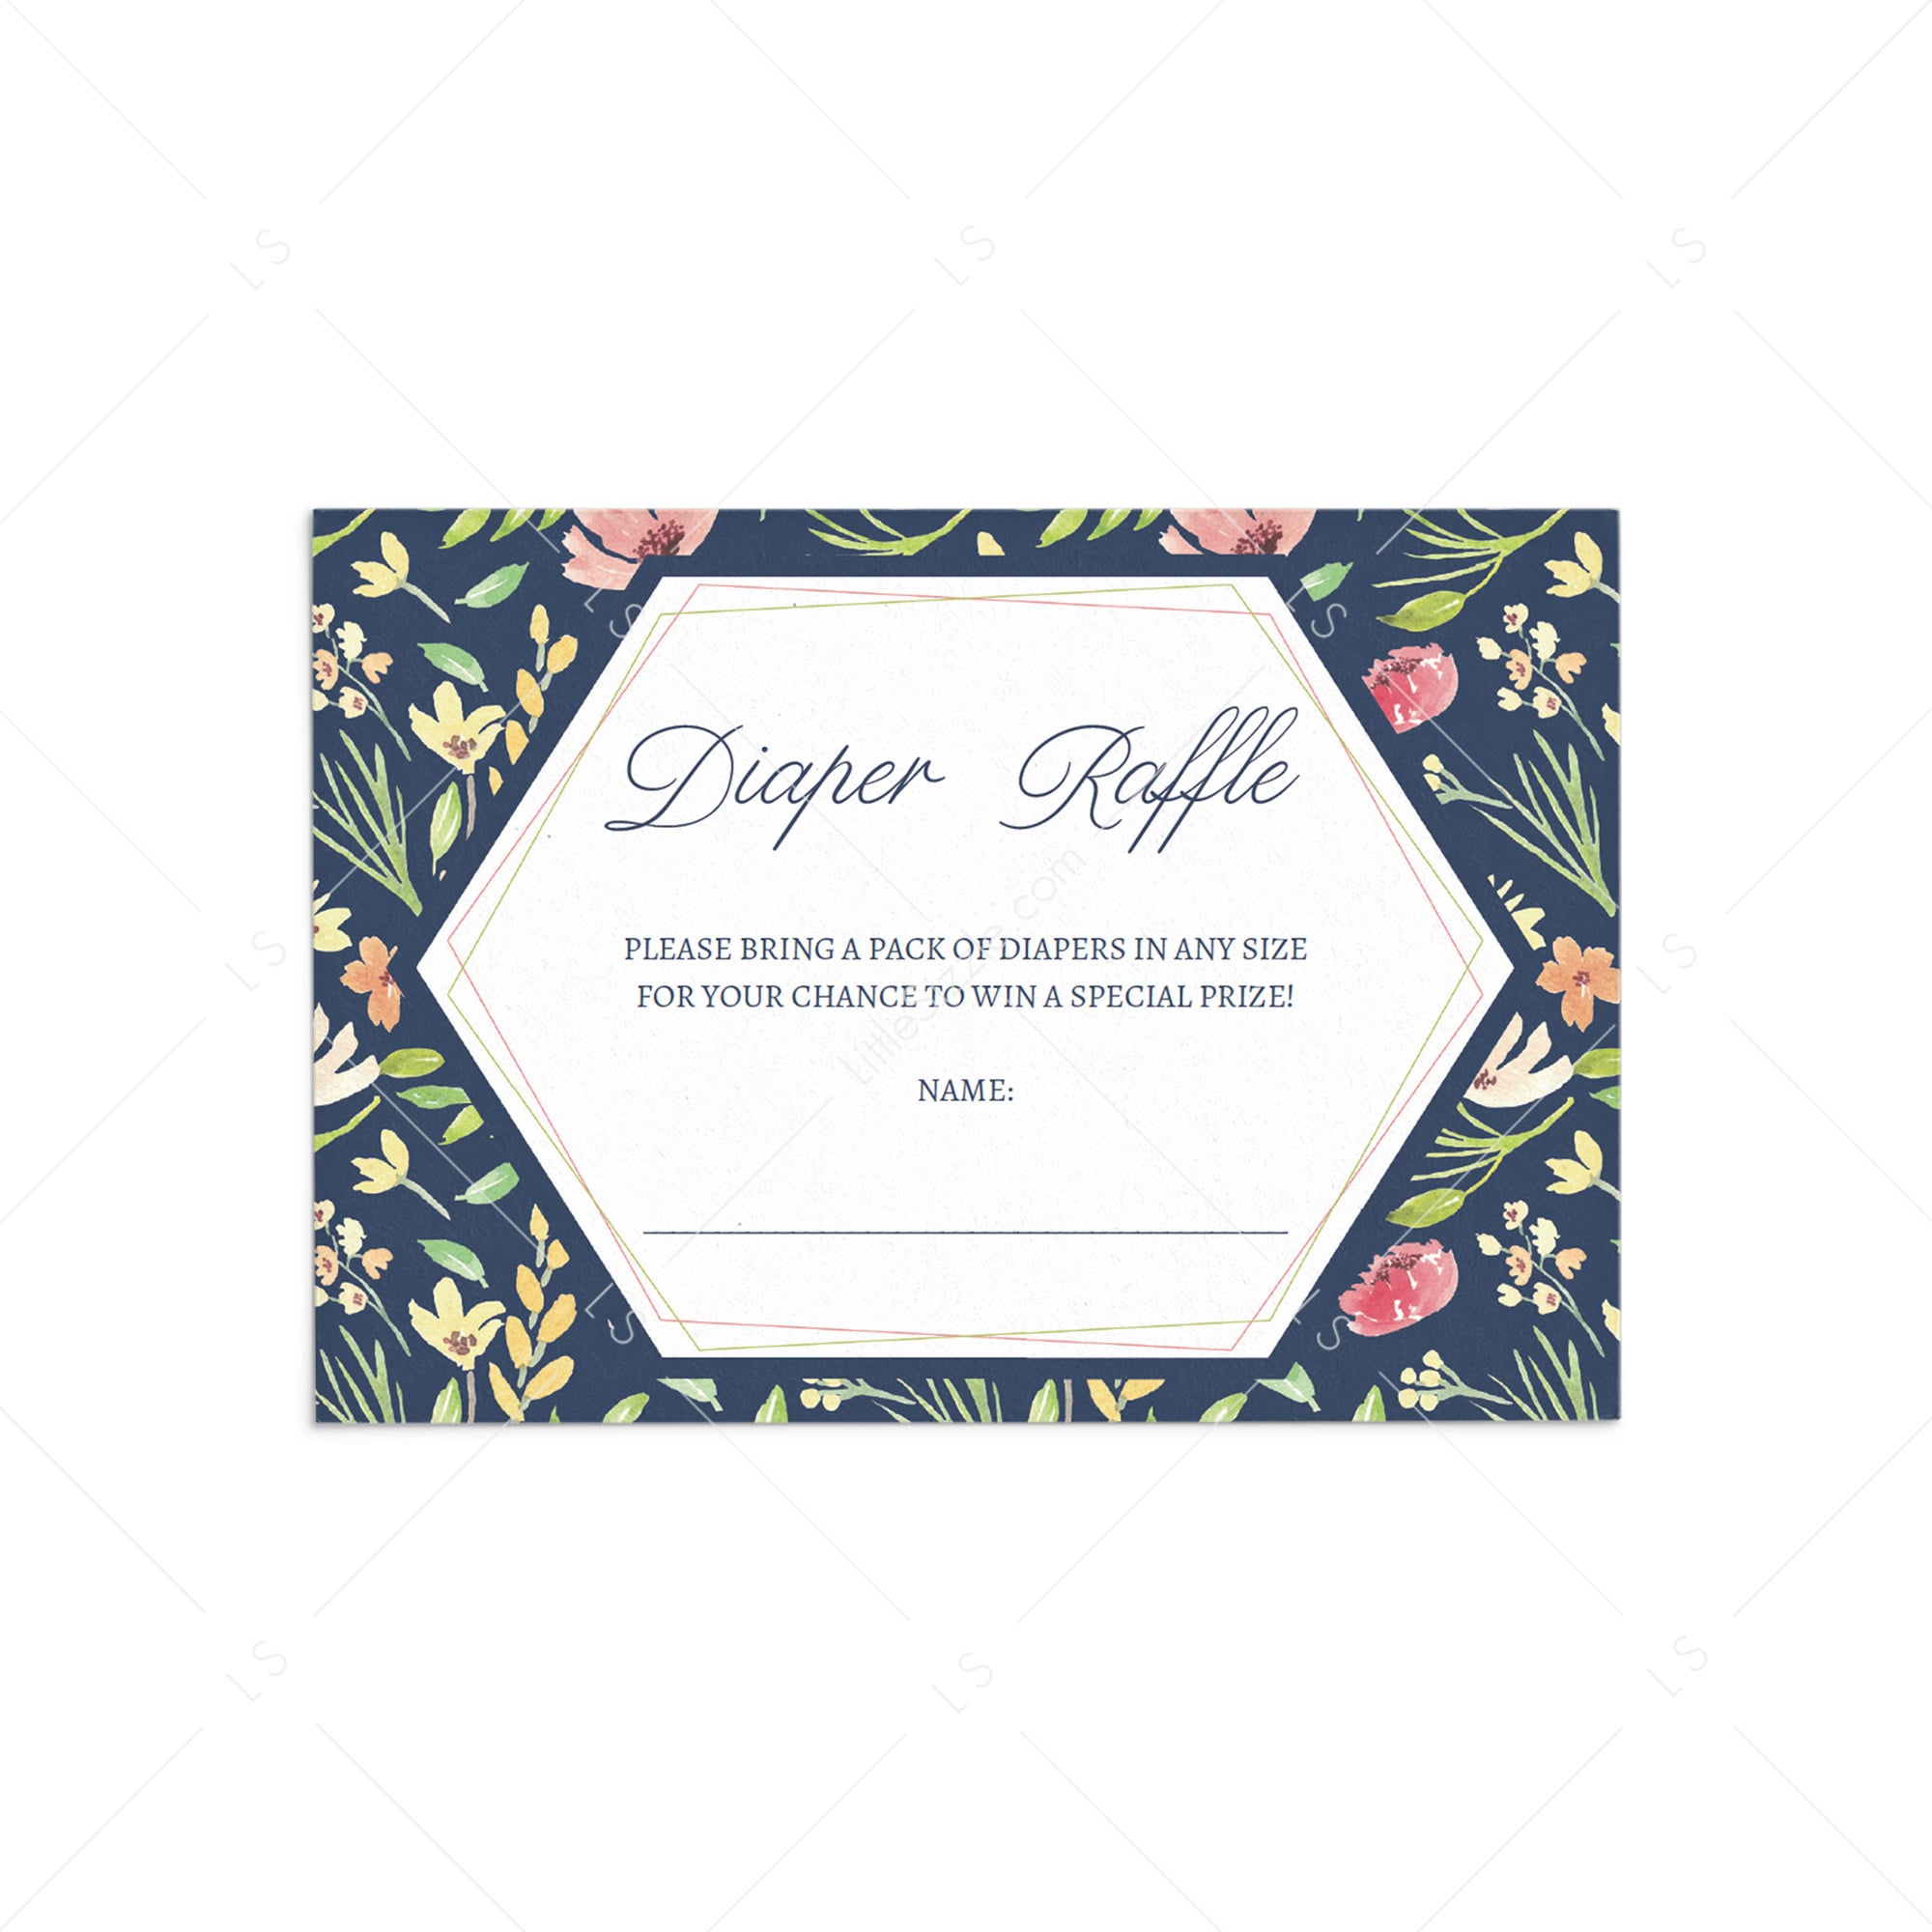 Diaper raffle ticket with floral pattern printable by LittleSizzle